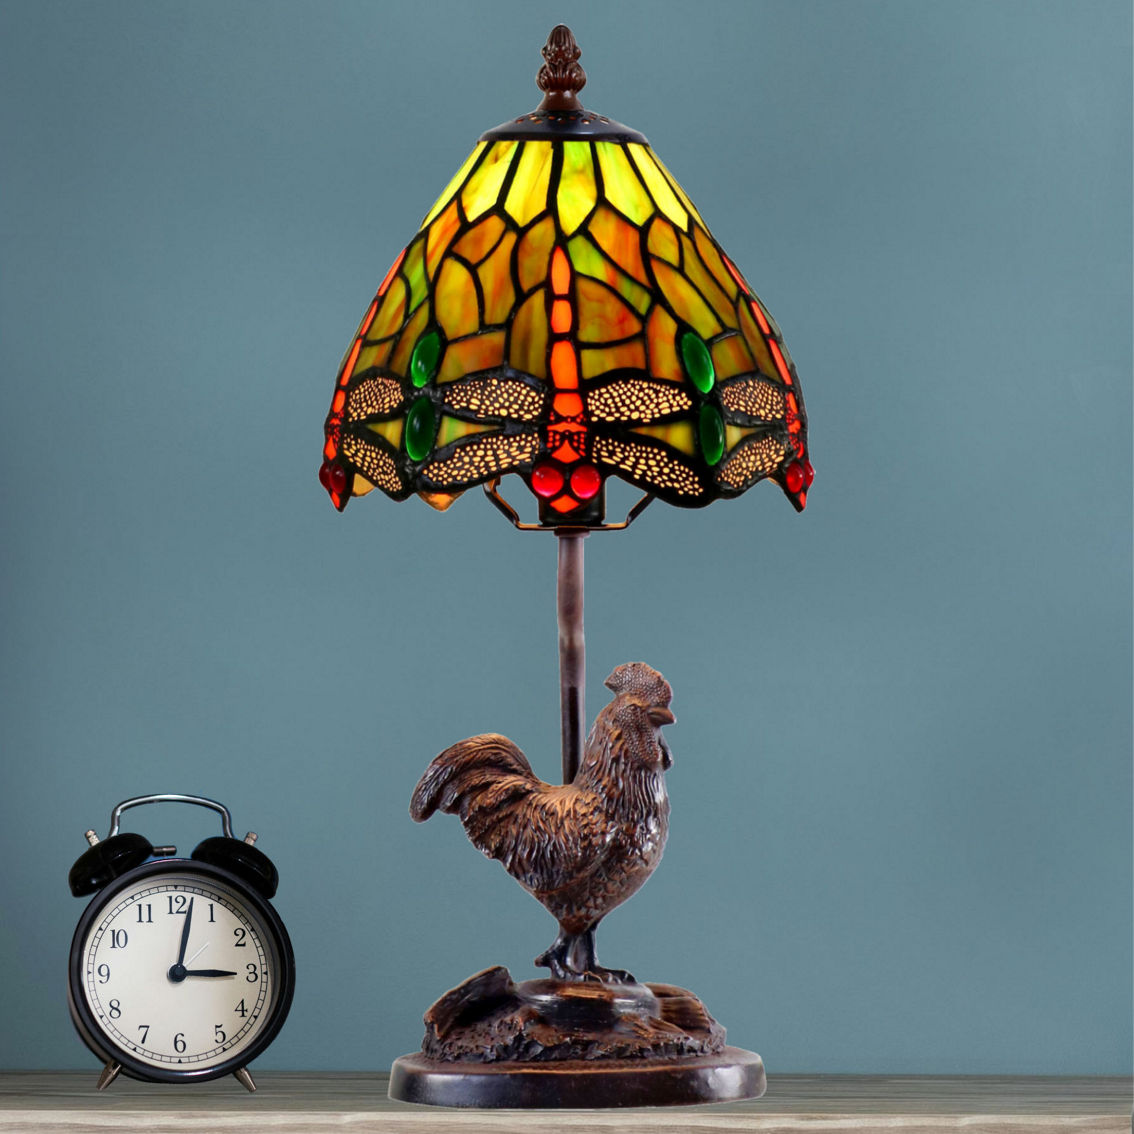 Dale Tiffany 16 in. Tall Rooster Sculpture Accent Lamp - Image 4 of 4